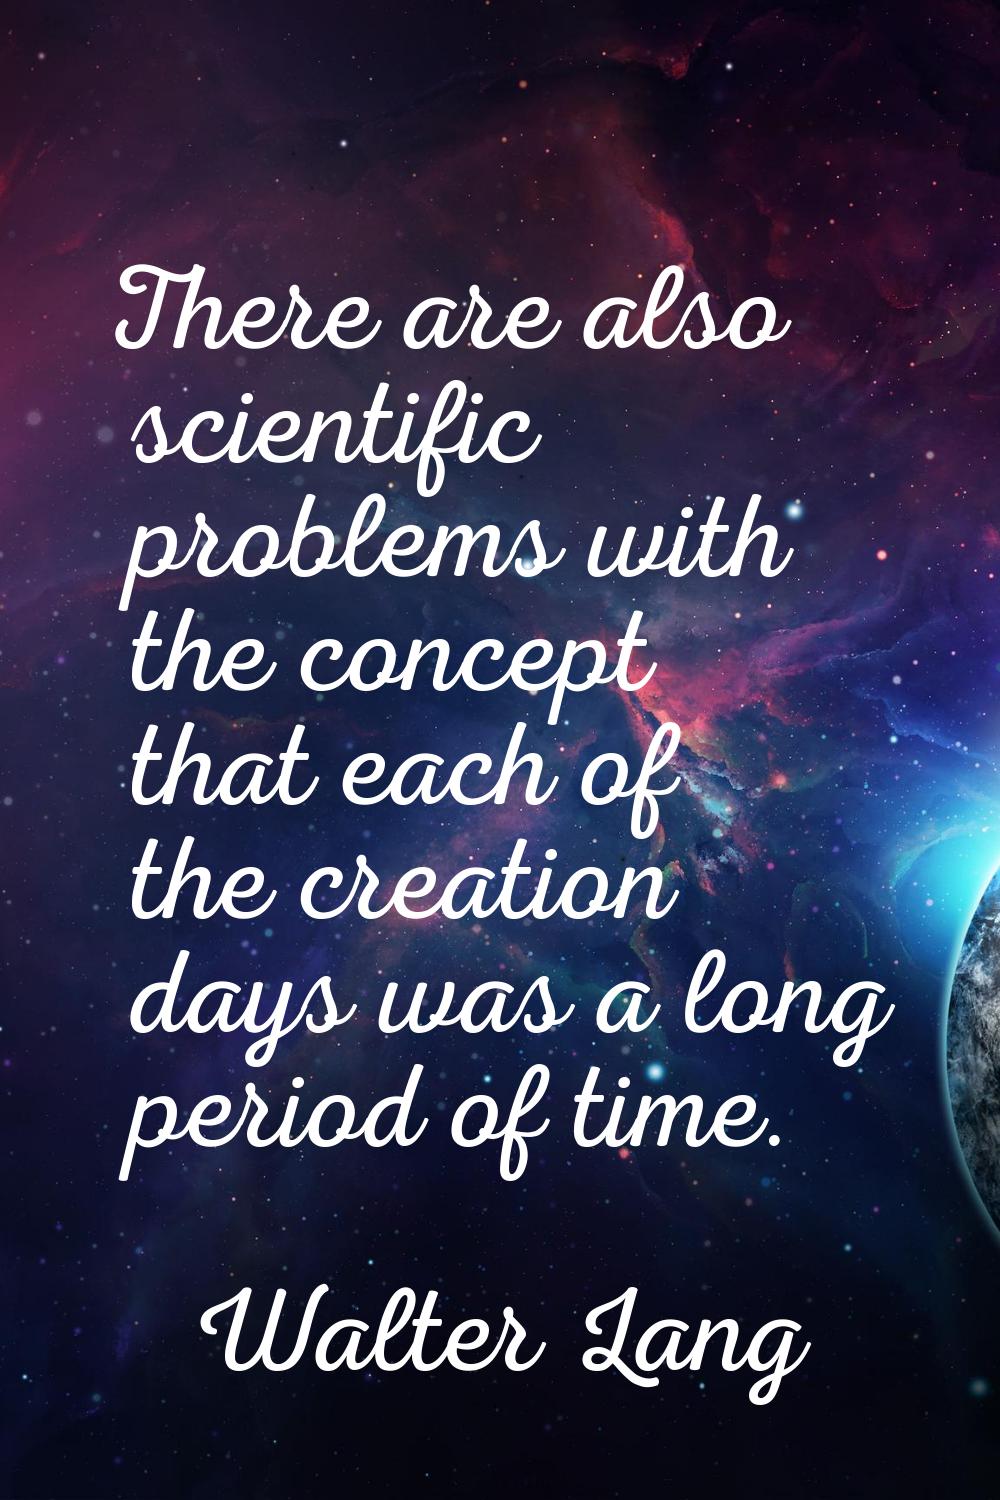 There are also scientific problems with the concept that each of the creation days was a long perio